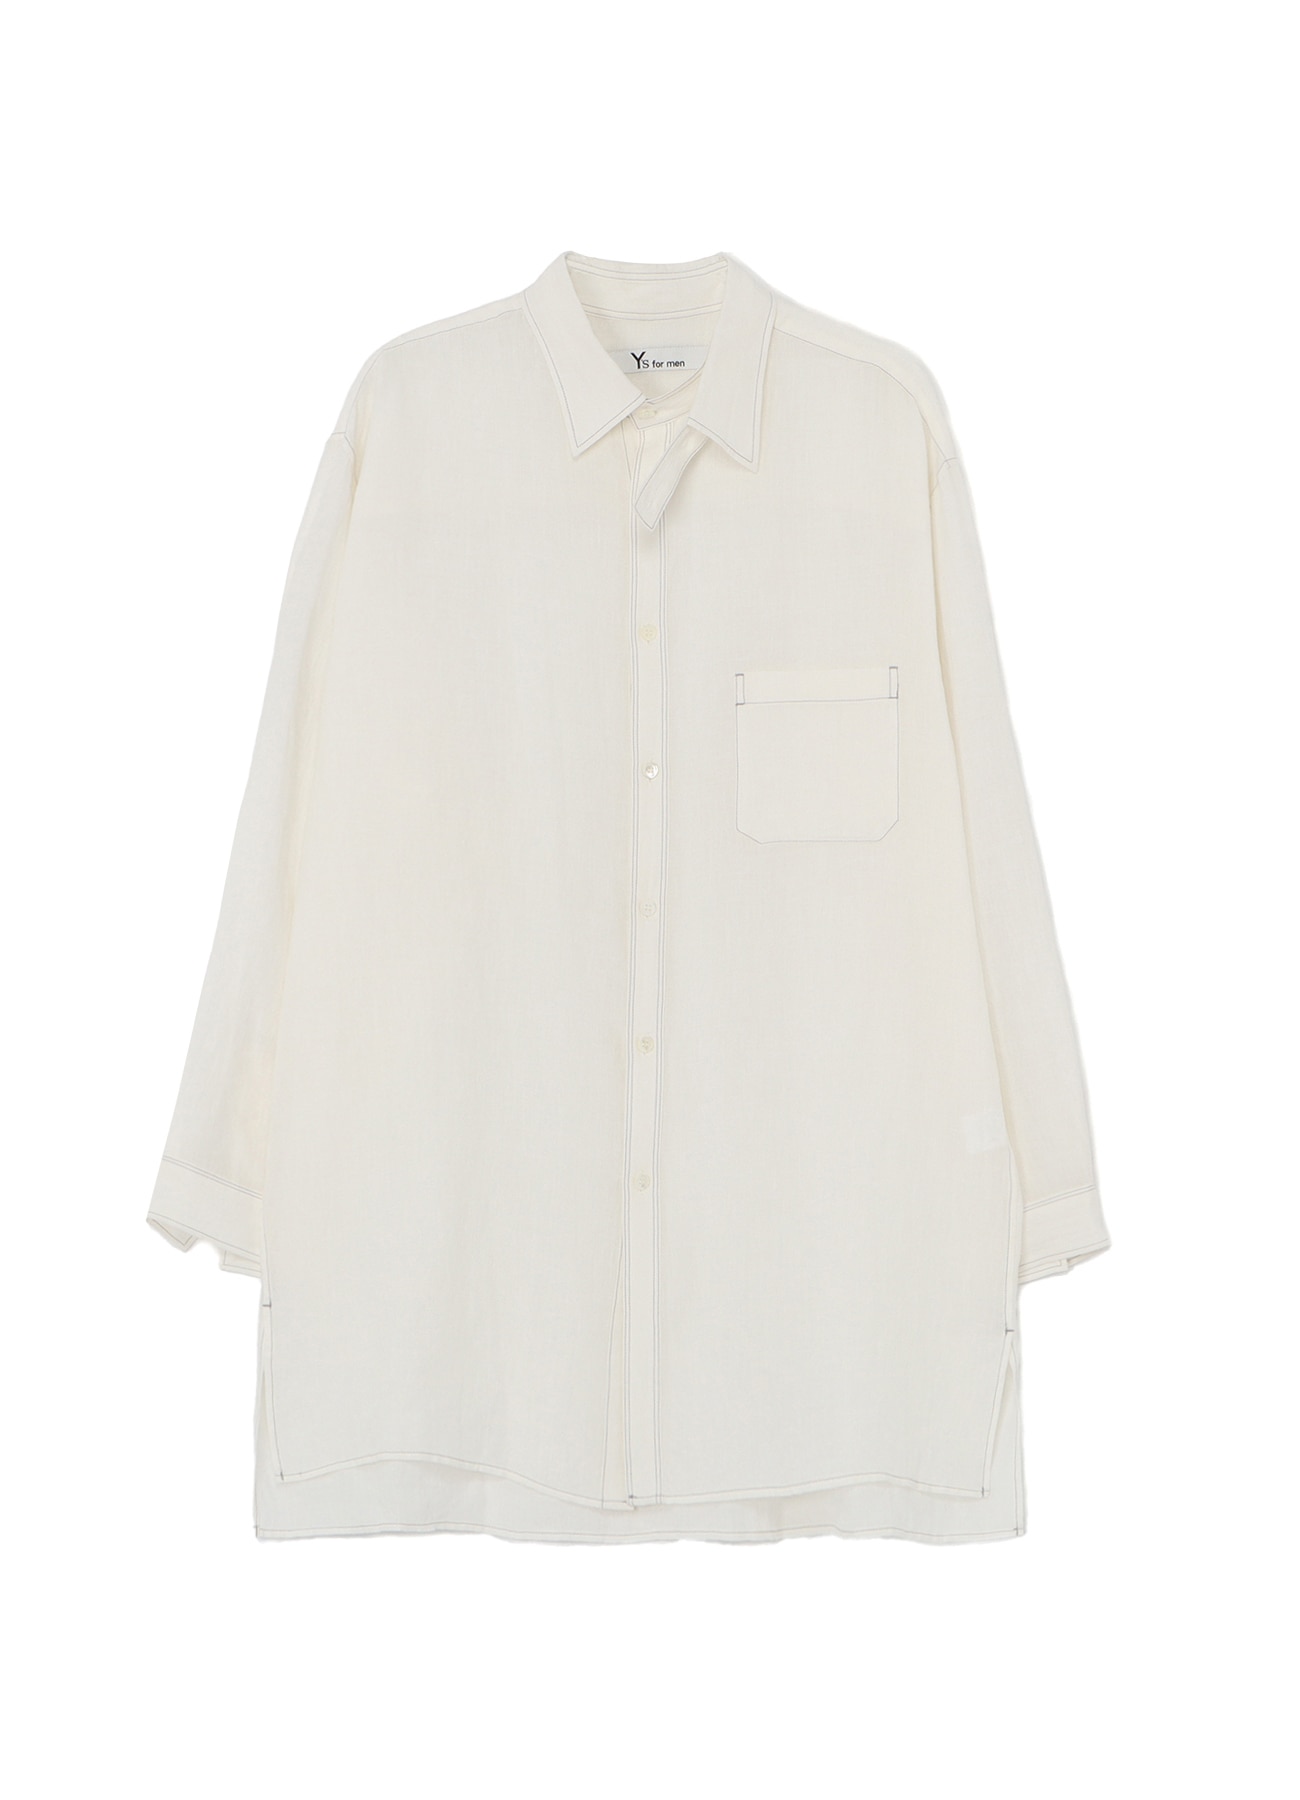 WHITE 60 LINEN LAWN SHIRT WITH ASYMMETRY COLLAR AND COLLOR COMBI DOUBLE STITCH